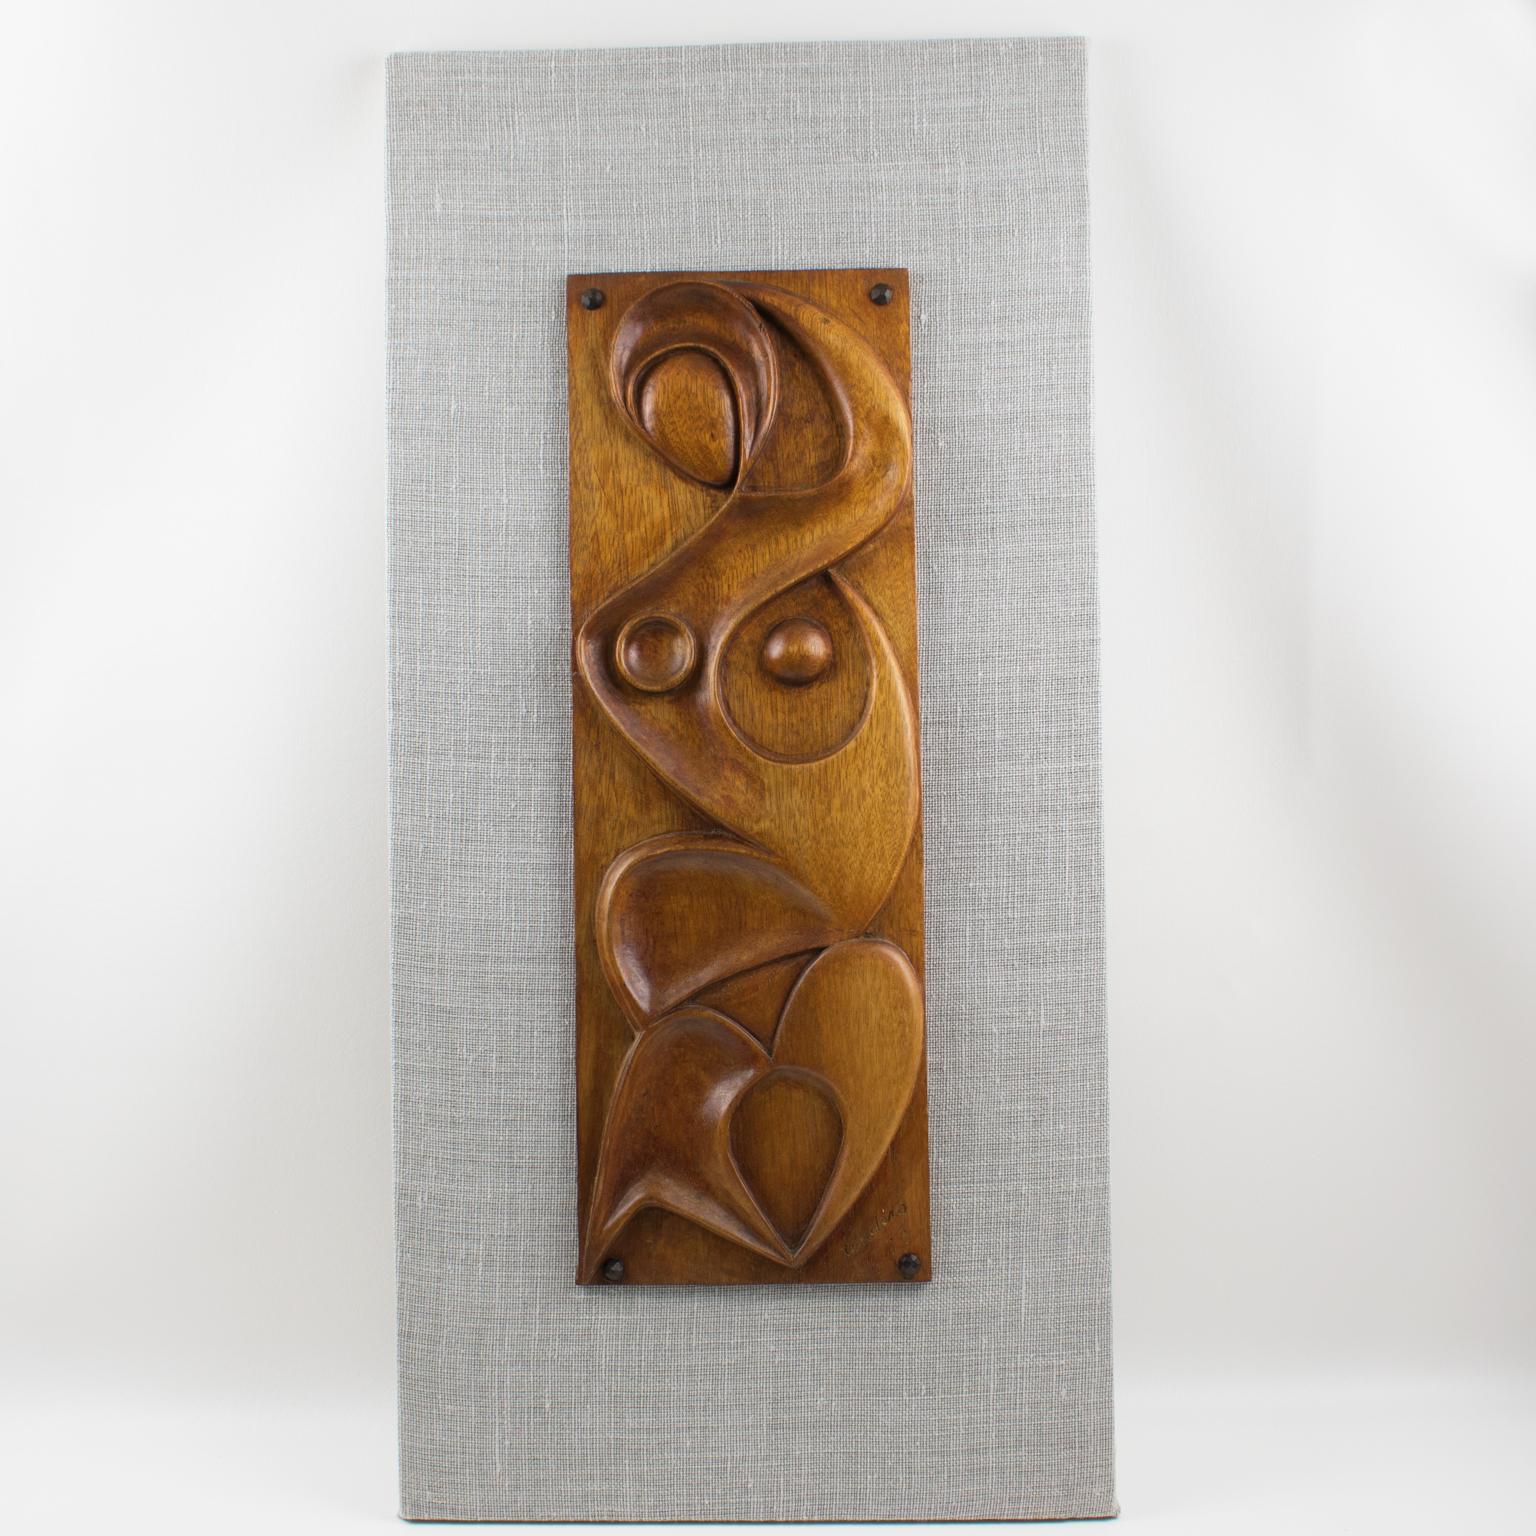 Abstract Wooden Wall-Mounted Art Sculpture Panel by Maxime Tendero For Sale 14